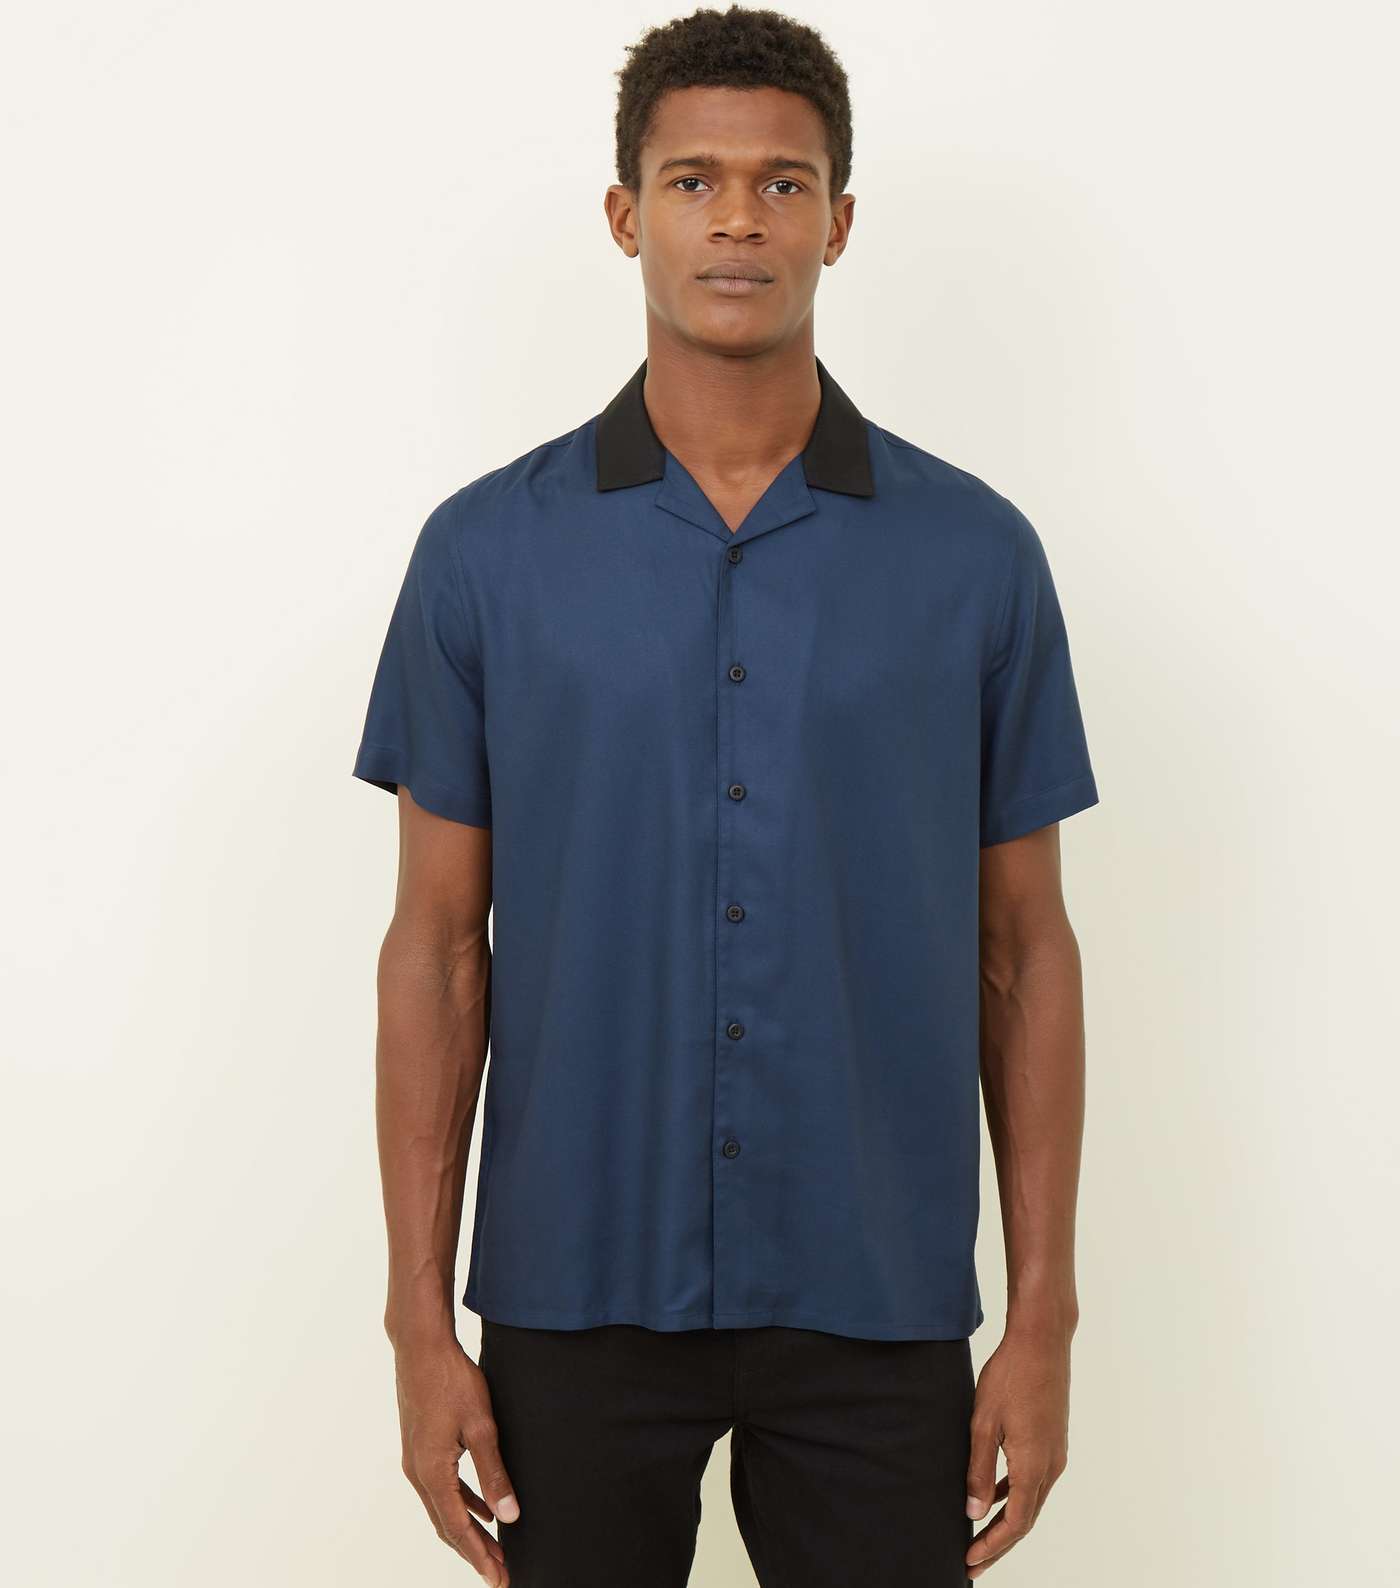 Bright Blue Contrast Collared Shirt